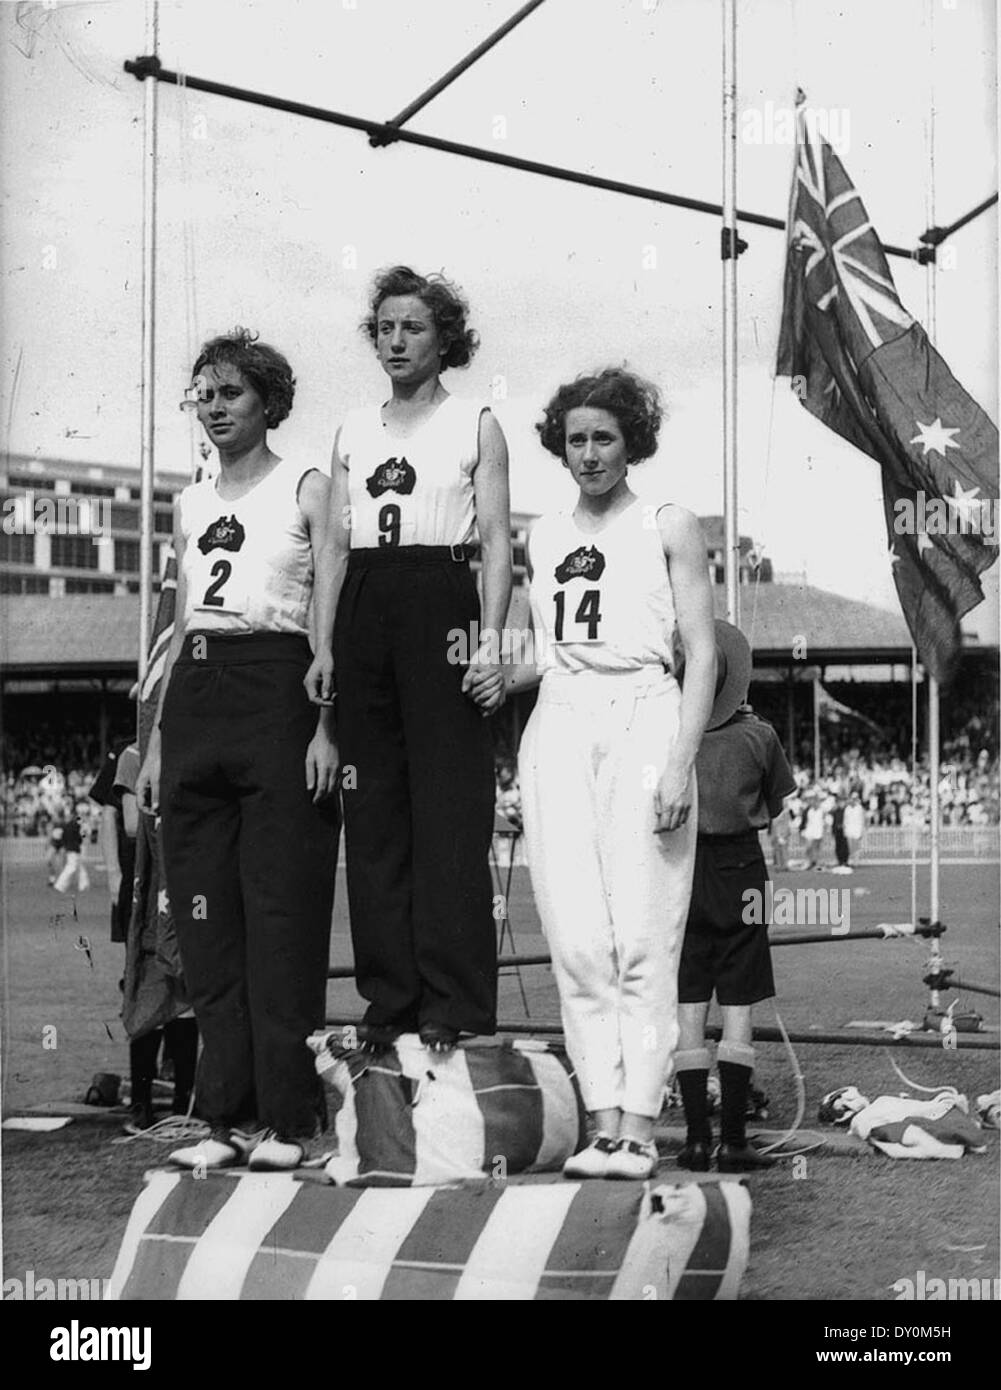 Decima Norman, Jean Coleman and Eileen Wearne win gold, silver and bronze medals for Australia in the 220 yard sprint, Empire Games, Sydney, 11 February 1938 / photographer Sam Hood Stock Photo